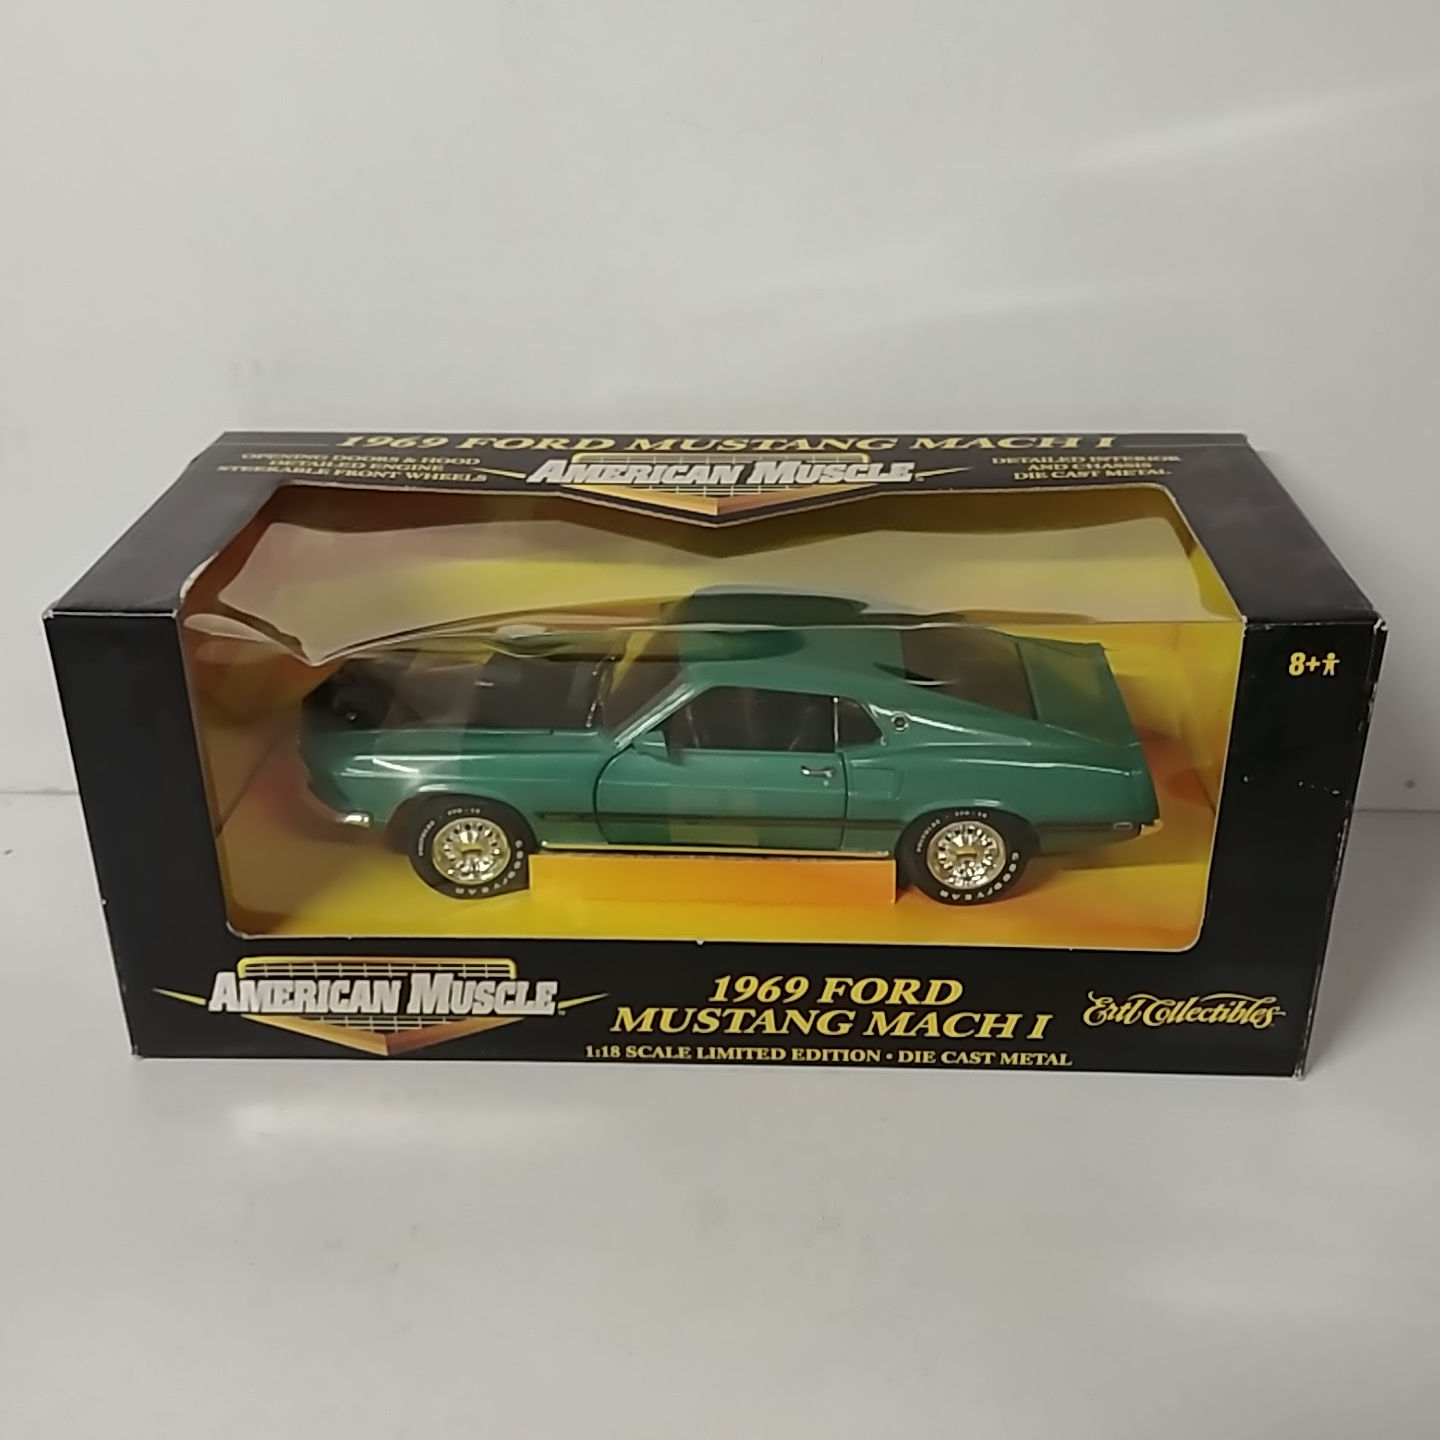 1969 Ford 1/18th Mustang Mach1 Silver Jade?